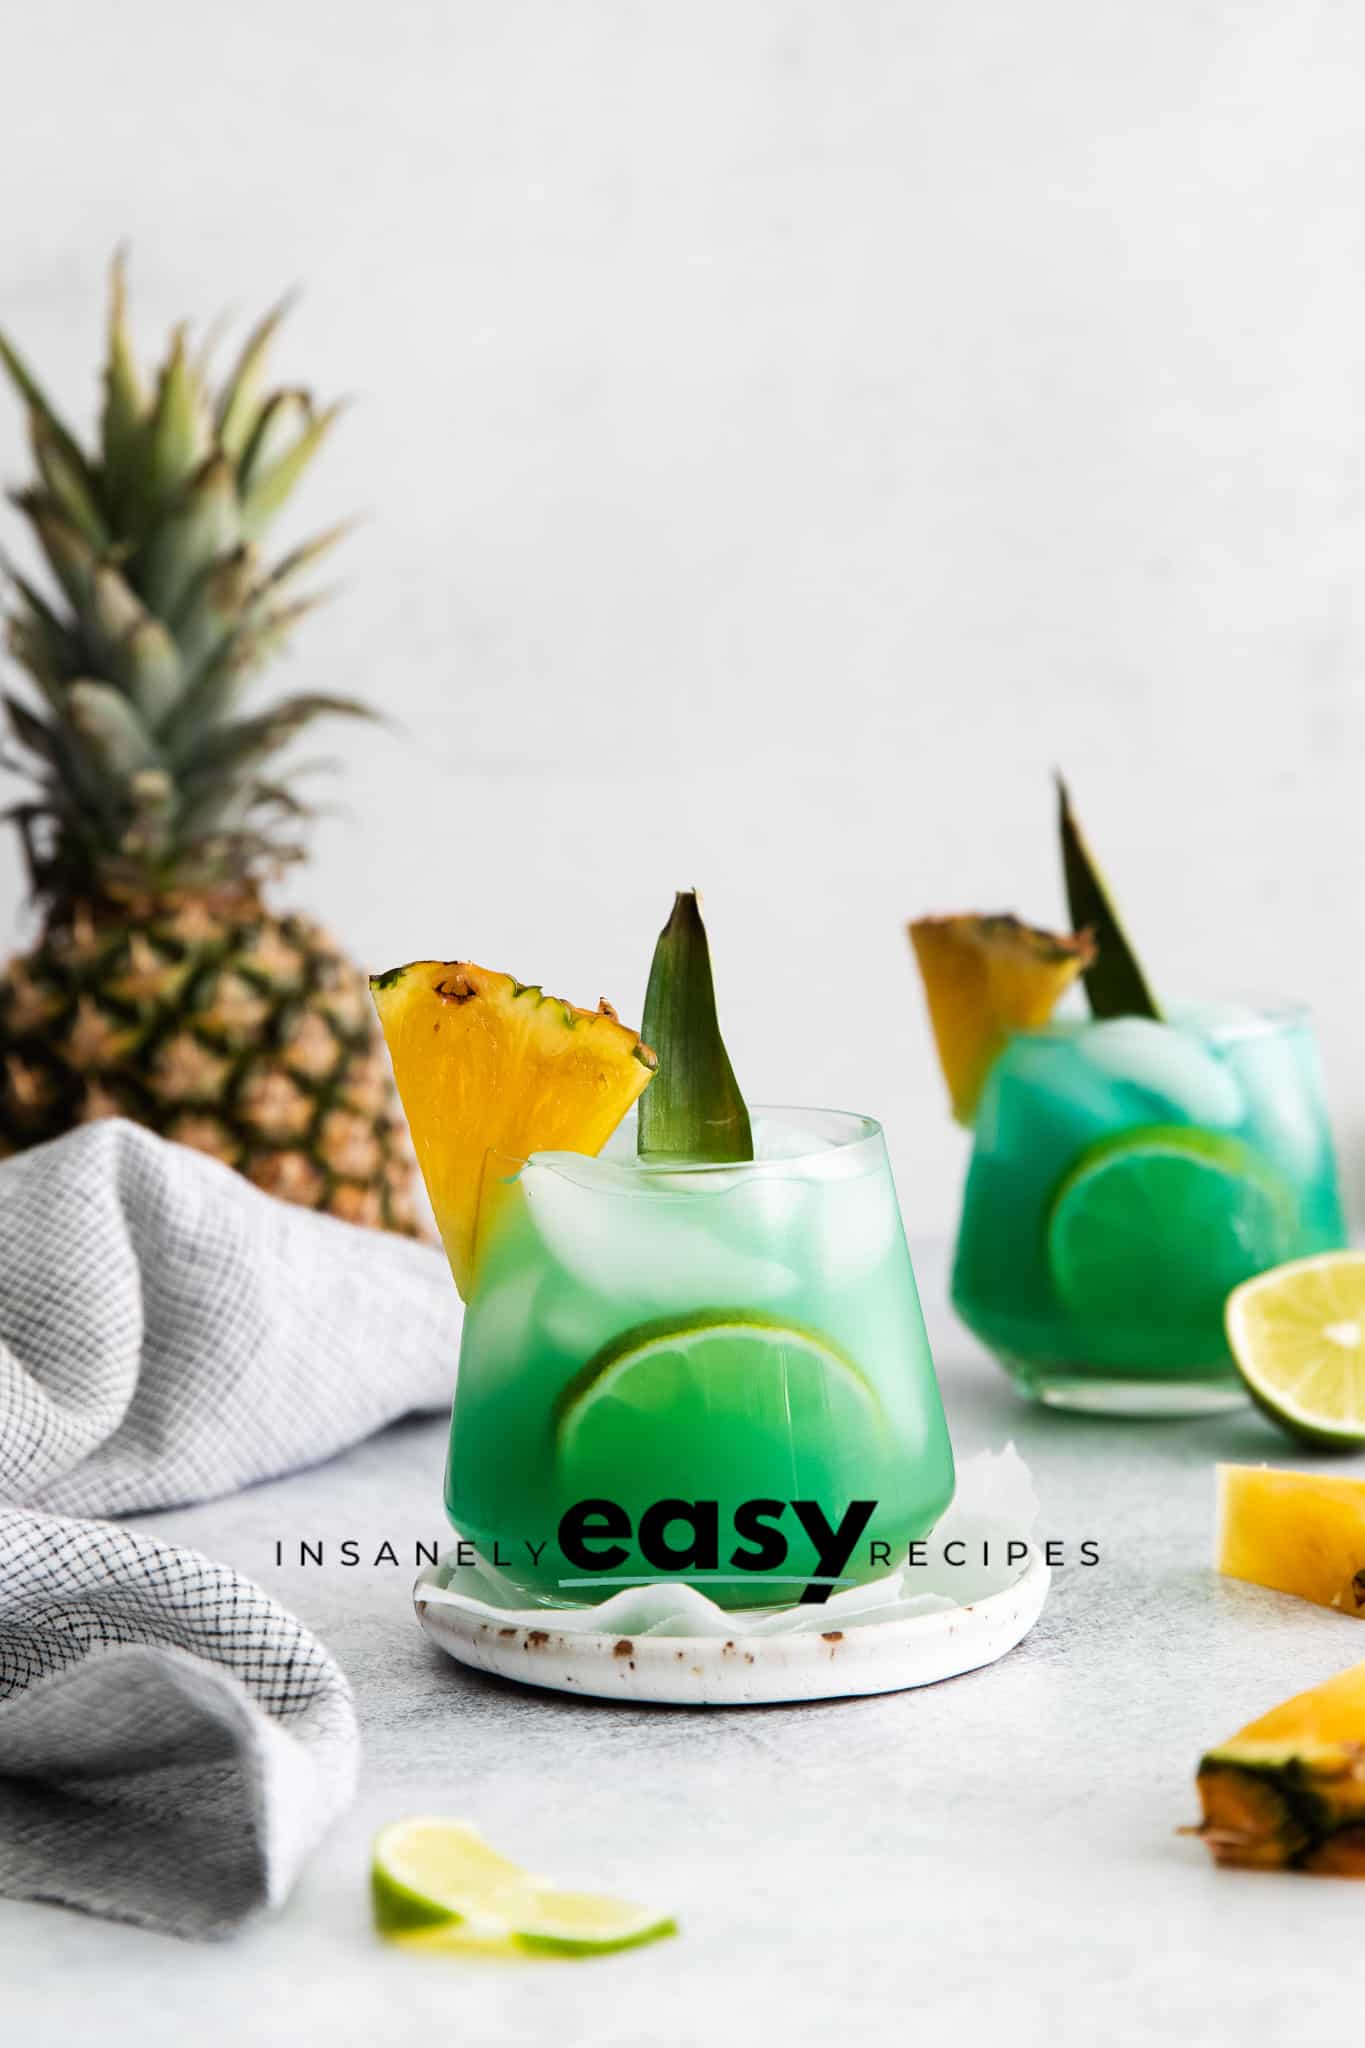 Pictured is a mermaid water. There are two short glasses, filled with green/blue liquid and ice cubes. There is a pineapple wedge and leaf on each rim. There are pineapple pieces and lime pieces on the table with a pineapple in the back left.